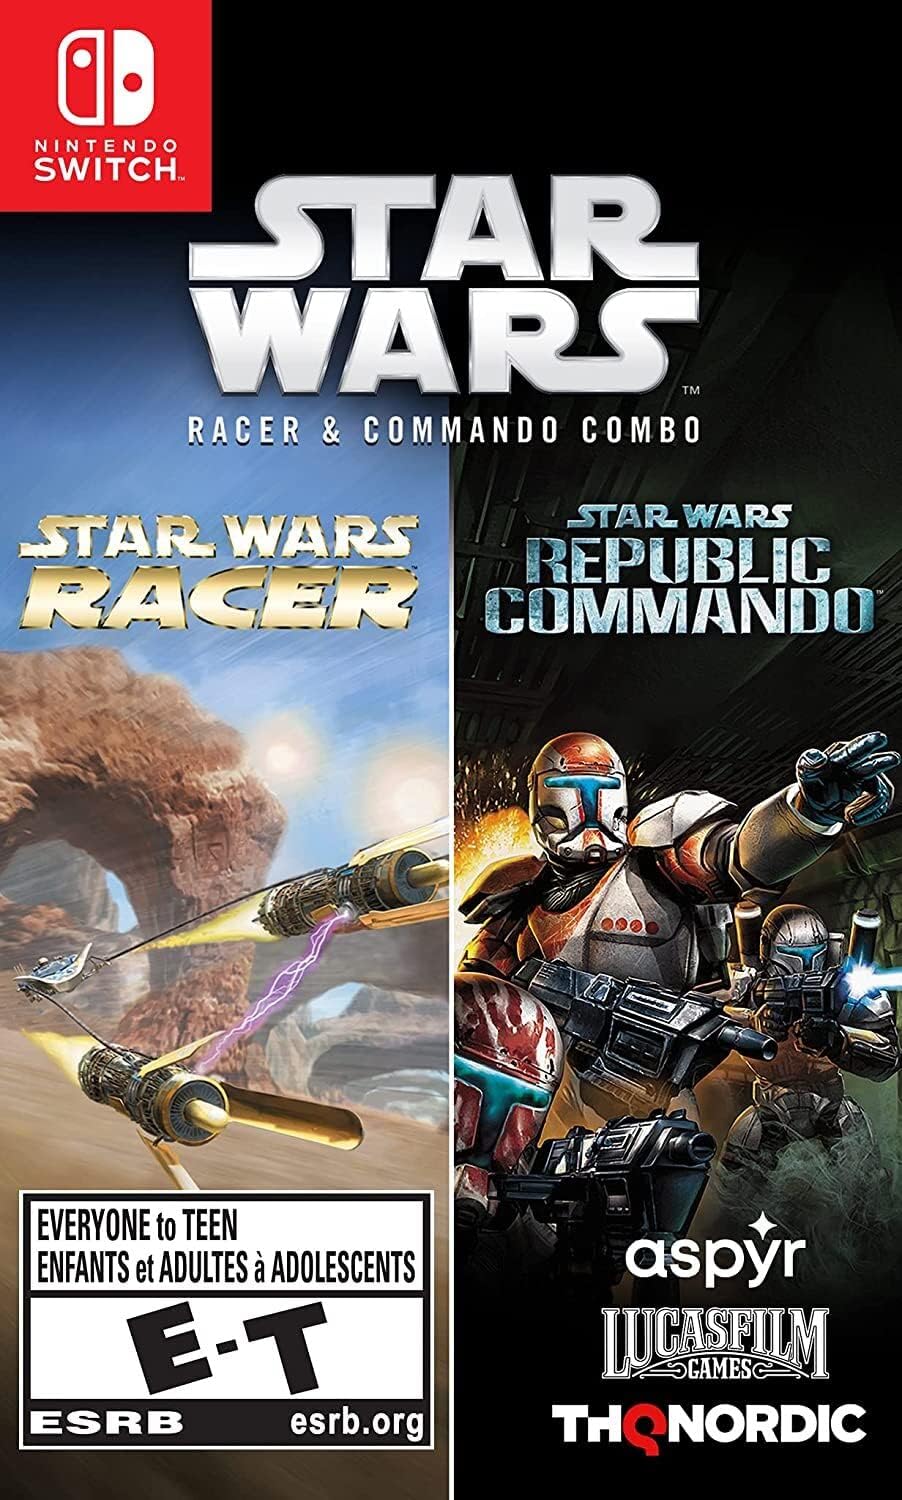 Star Wars Racer & Commando Combo (Nintendo Switch Physical) $19.93 + Free Shipping w/ Prime or on $35+